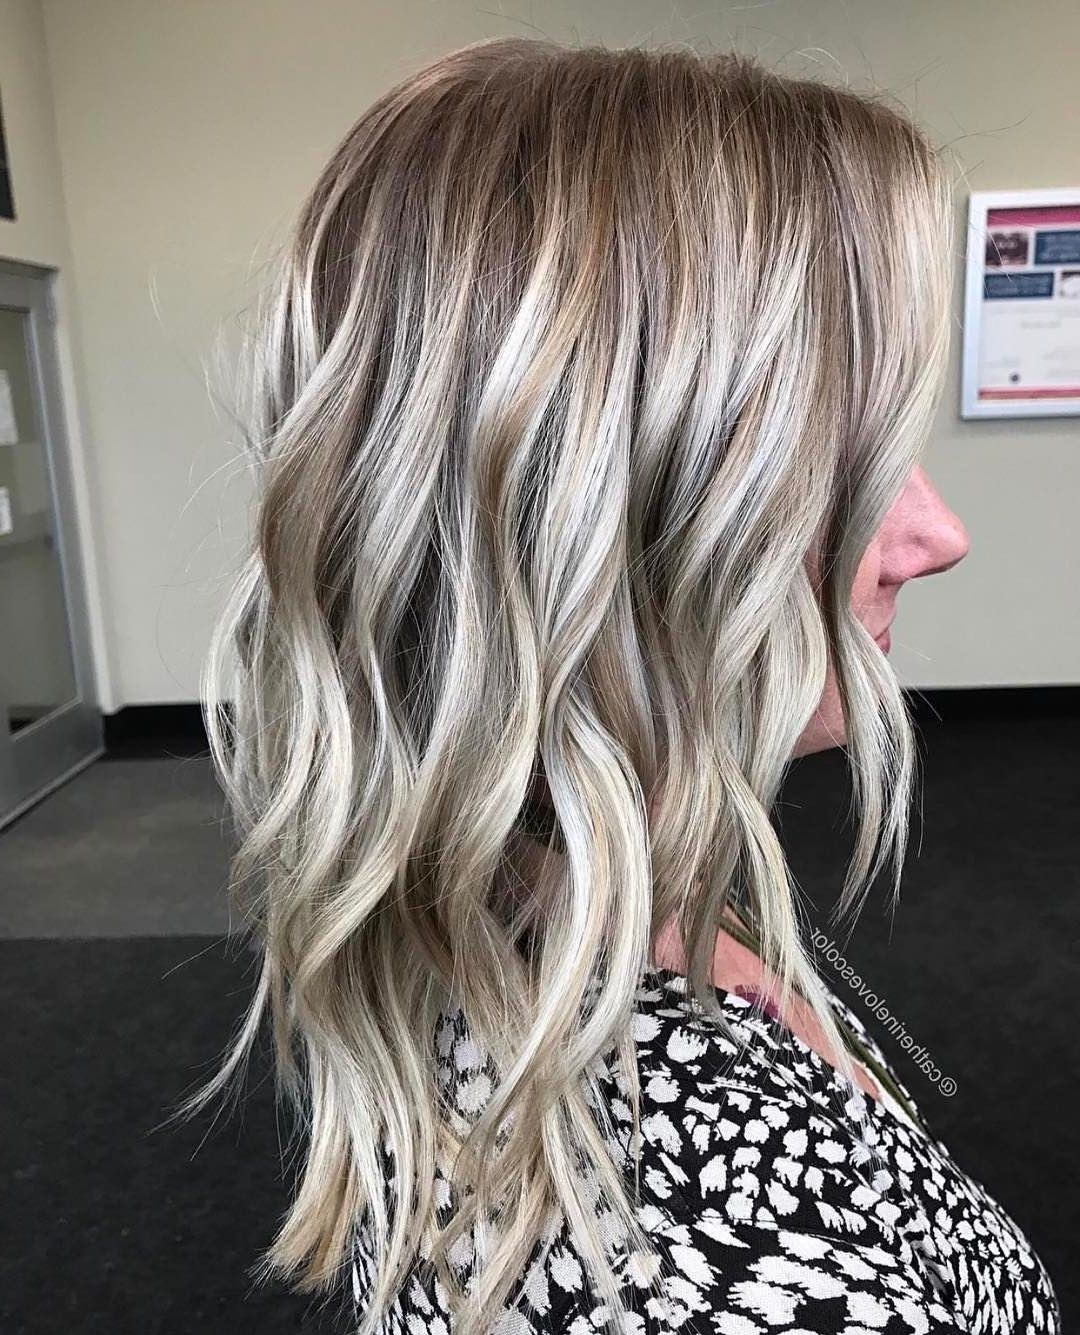 20 Adorable Ash Blonde Hairstyles To Try: Hair Color Ideas 2018 Inside Favorite Ice Blonde Lob Hairstyles (View 10 of 20)